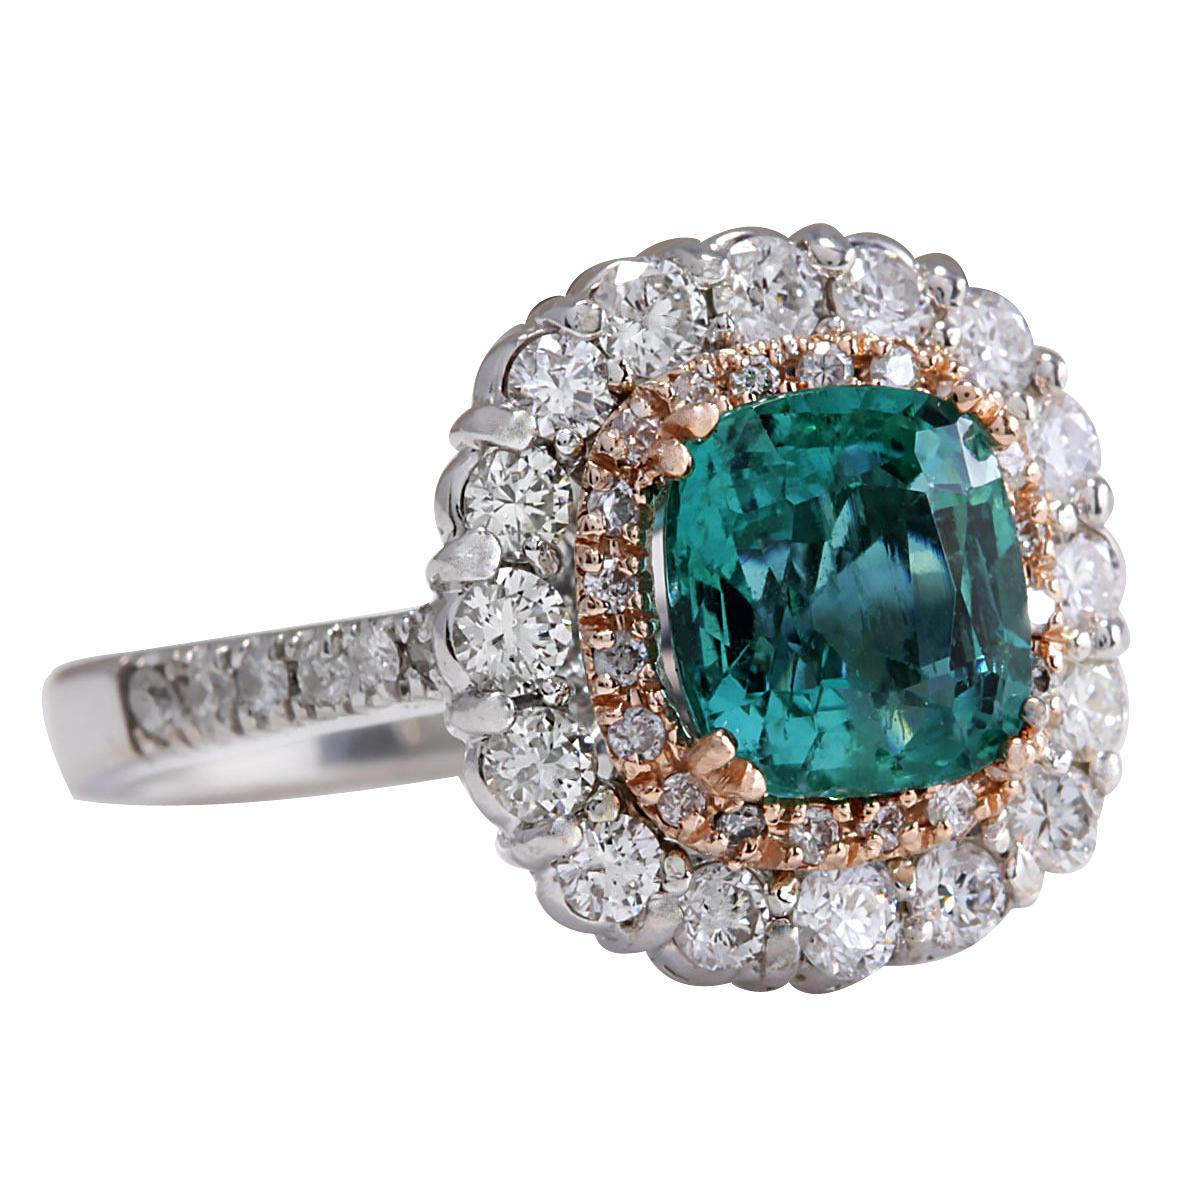 3.26 Carat Natural Emerald 14 Karat Two-Tone Gold Diamond Ring
Stamped: 14K Two Tone Gold
Total Ring Weight: 6.5 Grams
Total Natural Emerald Weight is 2.31 Carat (Measures: 8.00x8.00 mm)
Color: Green
Total Natural Diamond Weight is 0.95 Carat
Color: